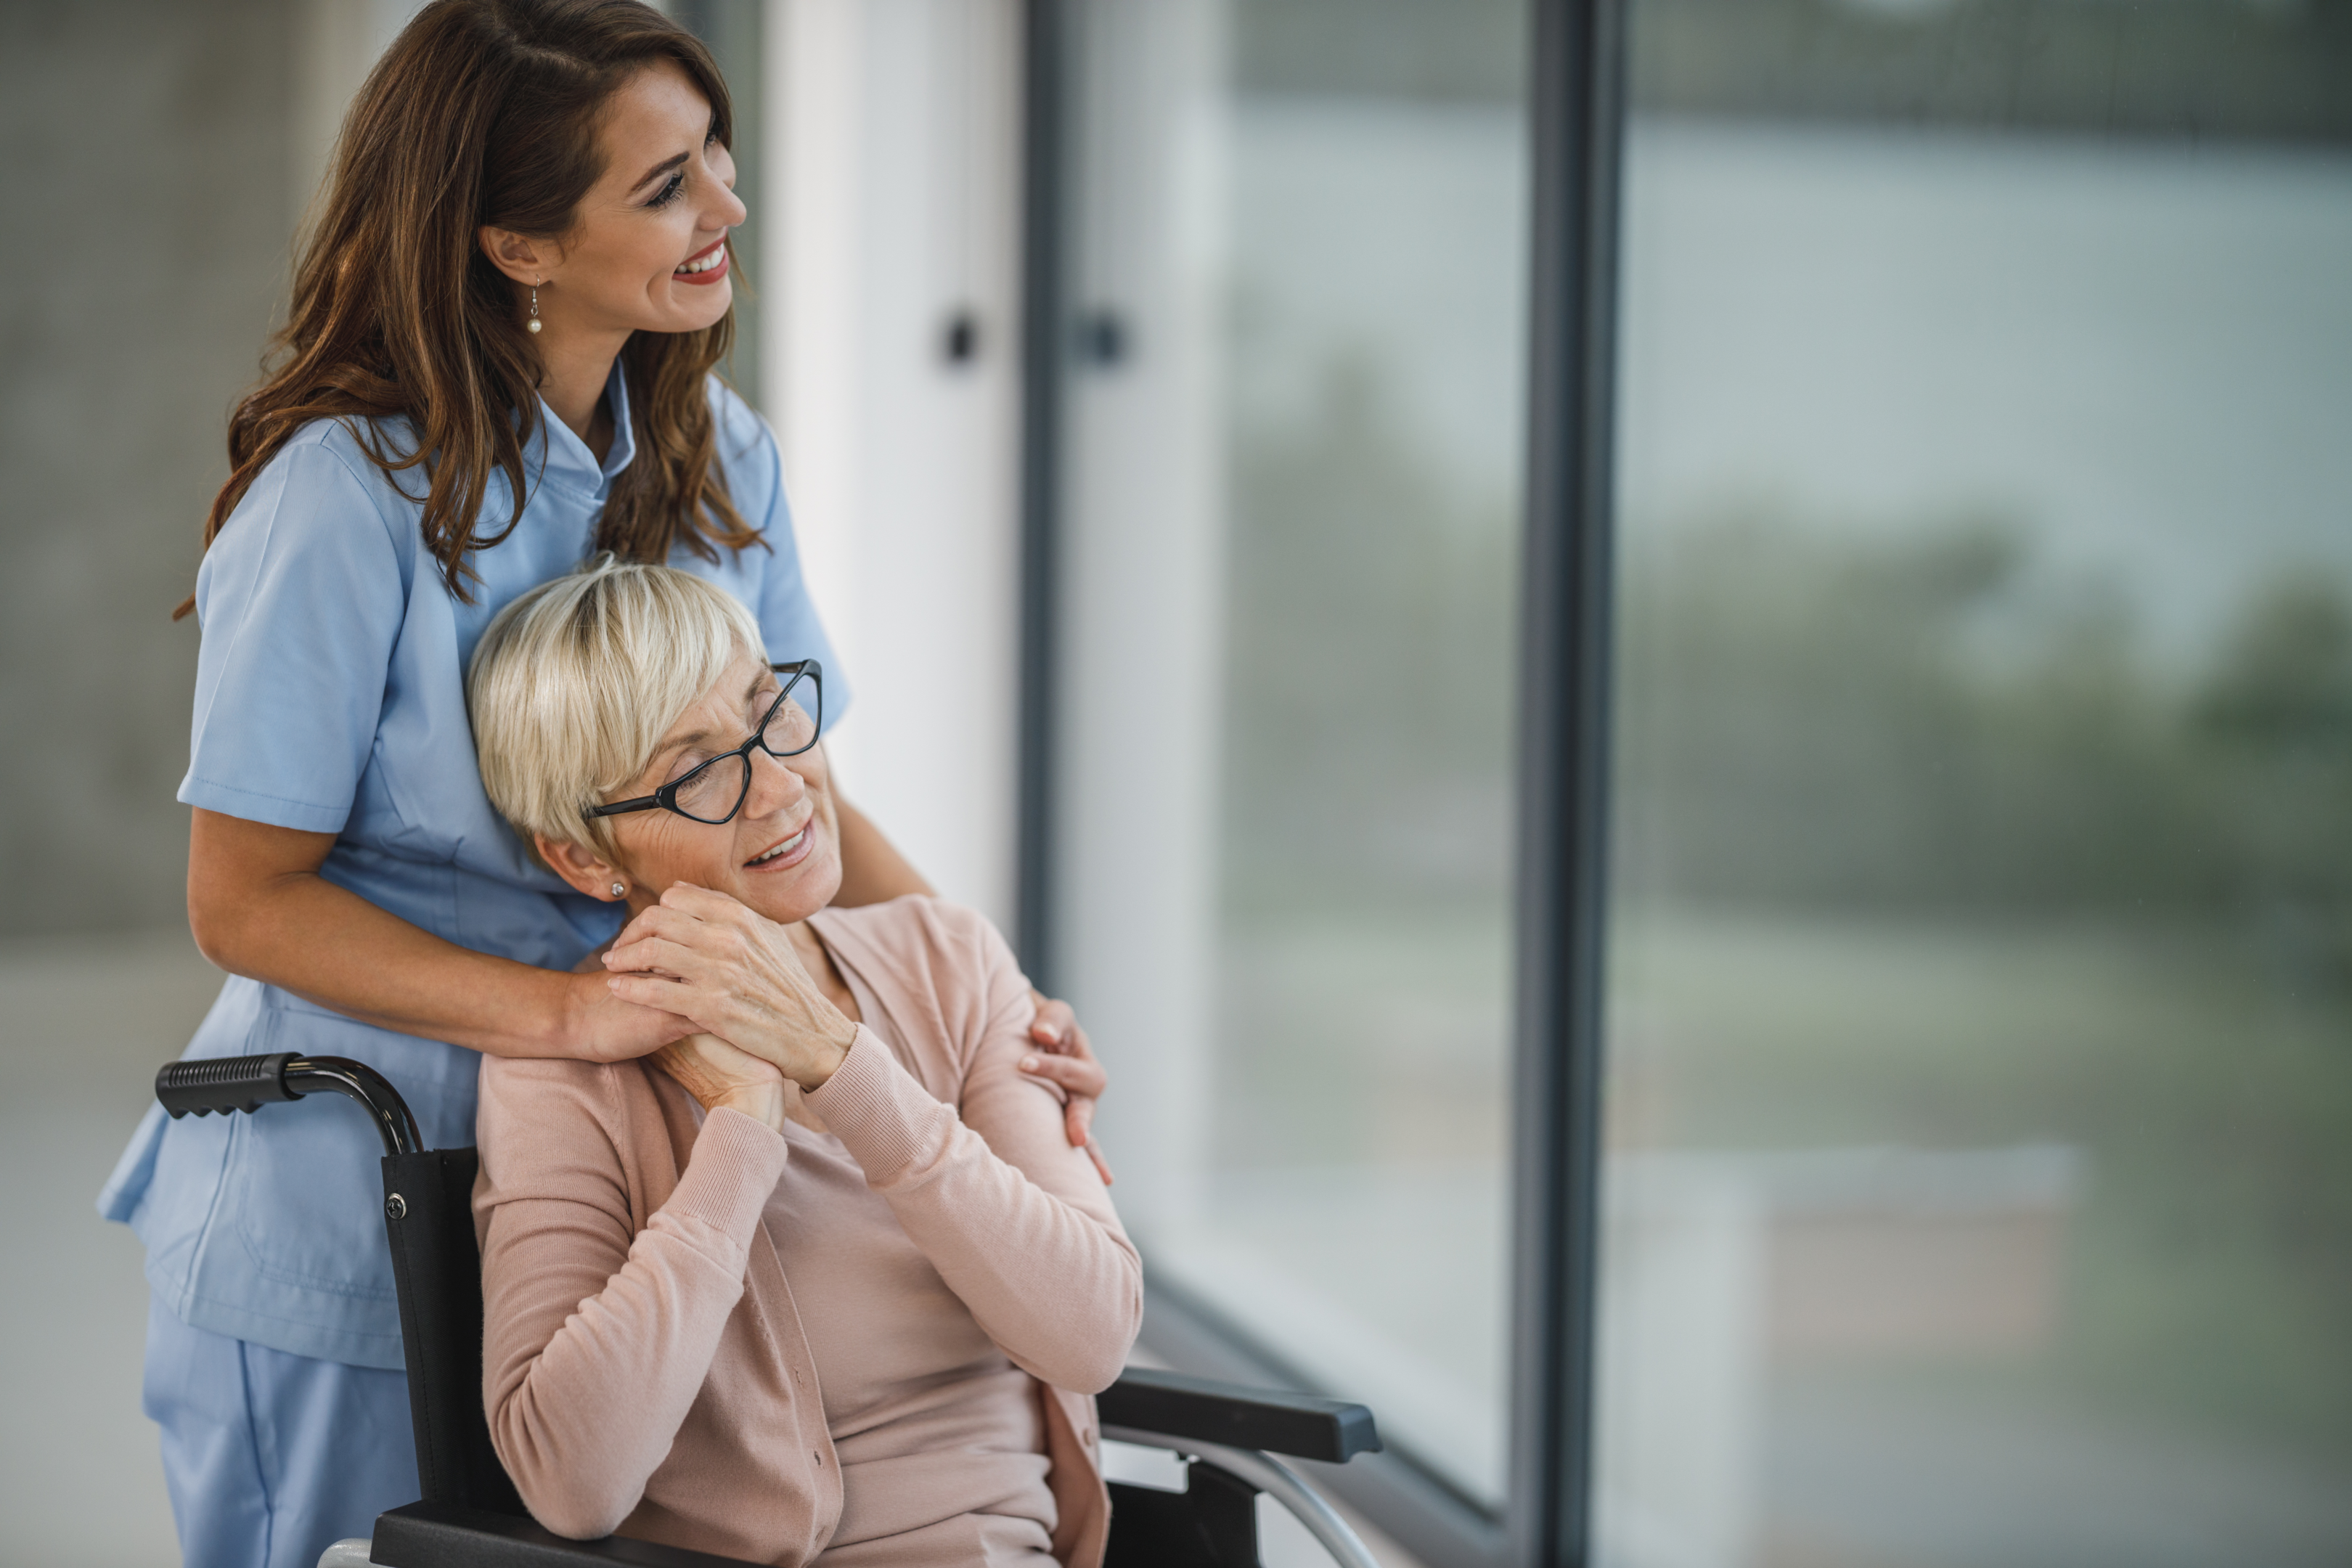 "A young caregiver assists a senior beneficiary of the SSA's expanded Compassionate Allowances Program, a testament to the extended reach of support for individuals with severe disabilities."